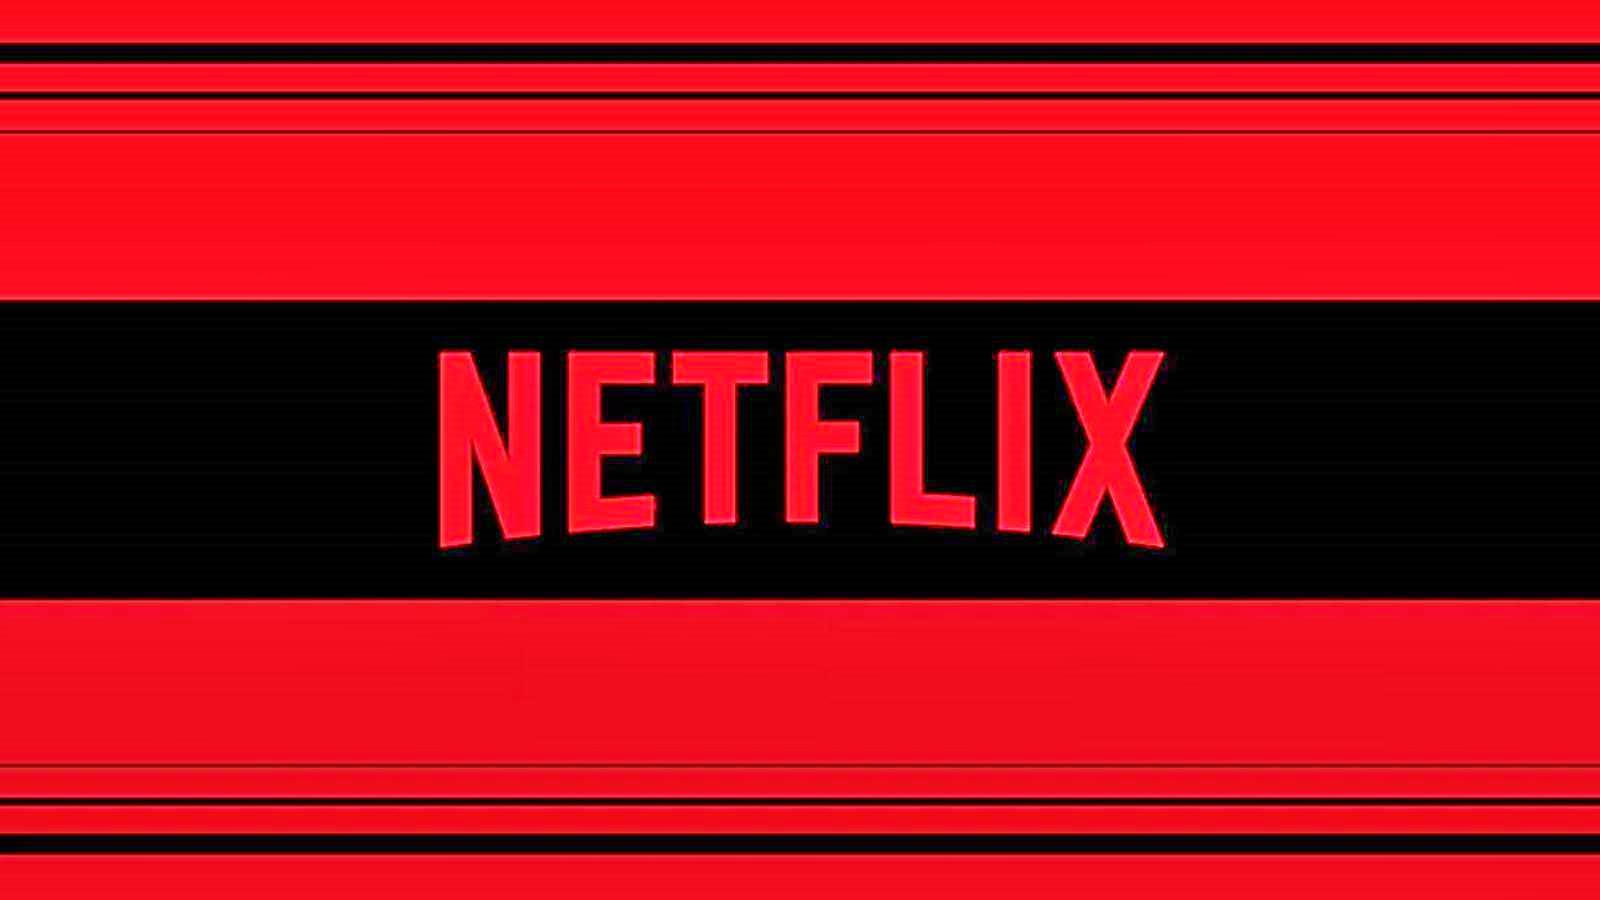 Netflix GREAT News Subscribe, New Release